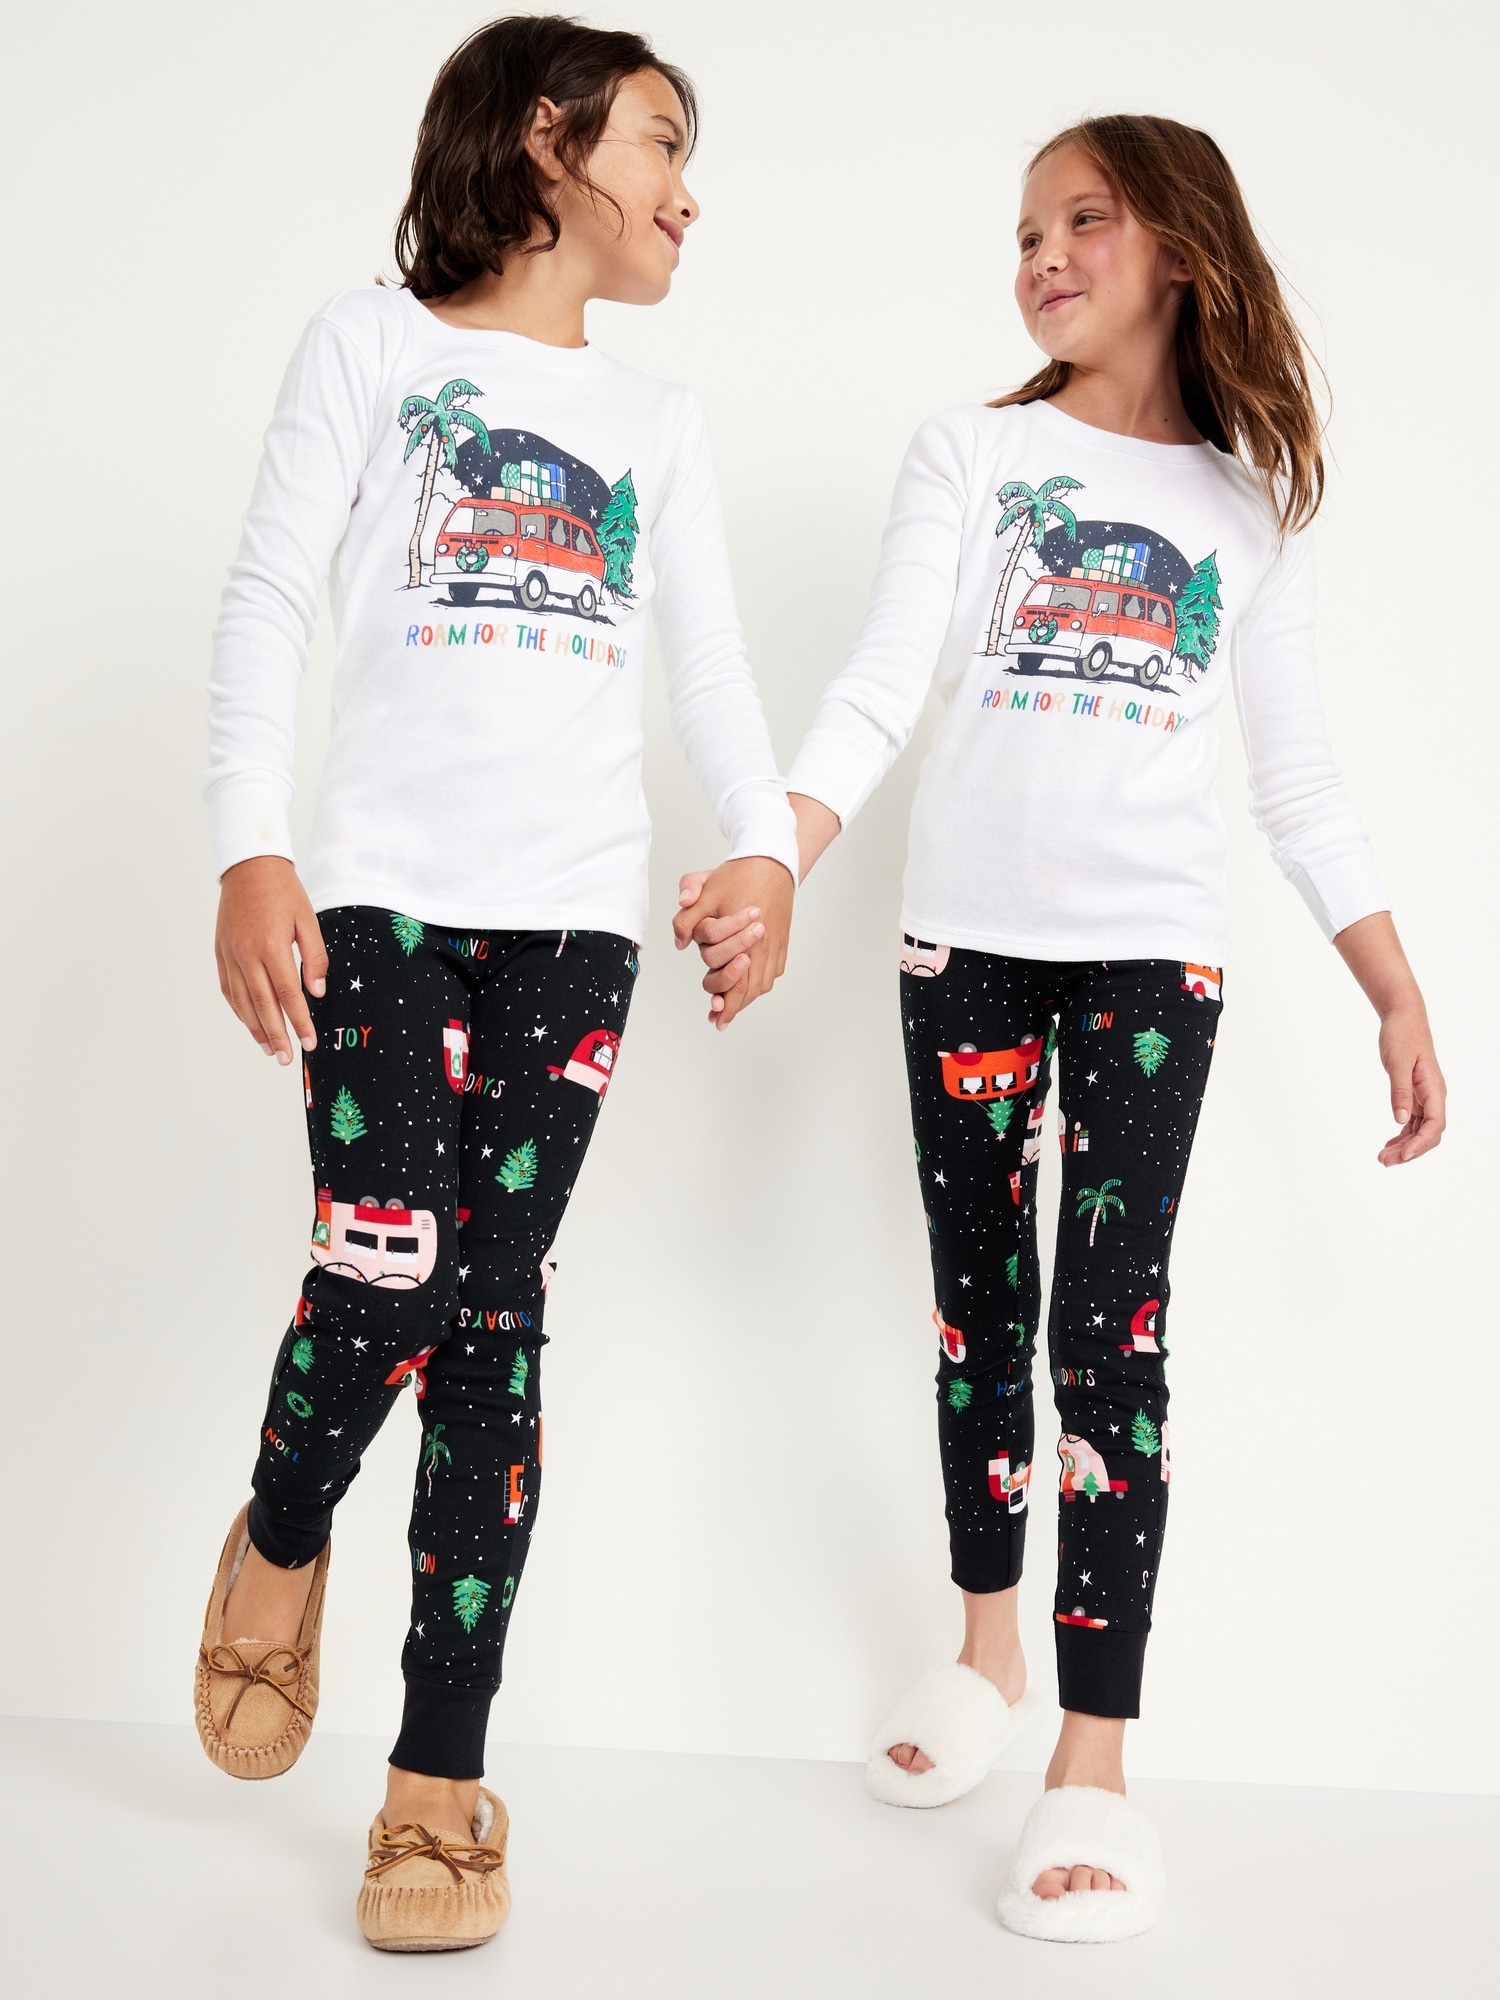 Matching Holiday Graphic Gender-Neutral Snug-Fit Pajama Set for Kids